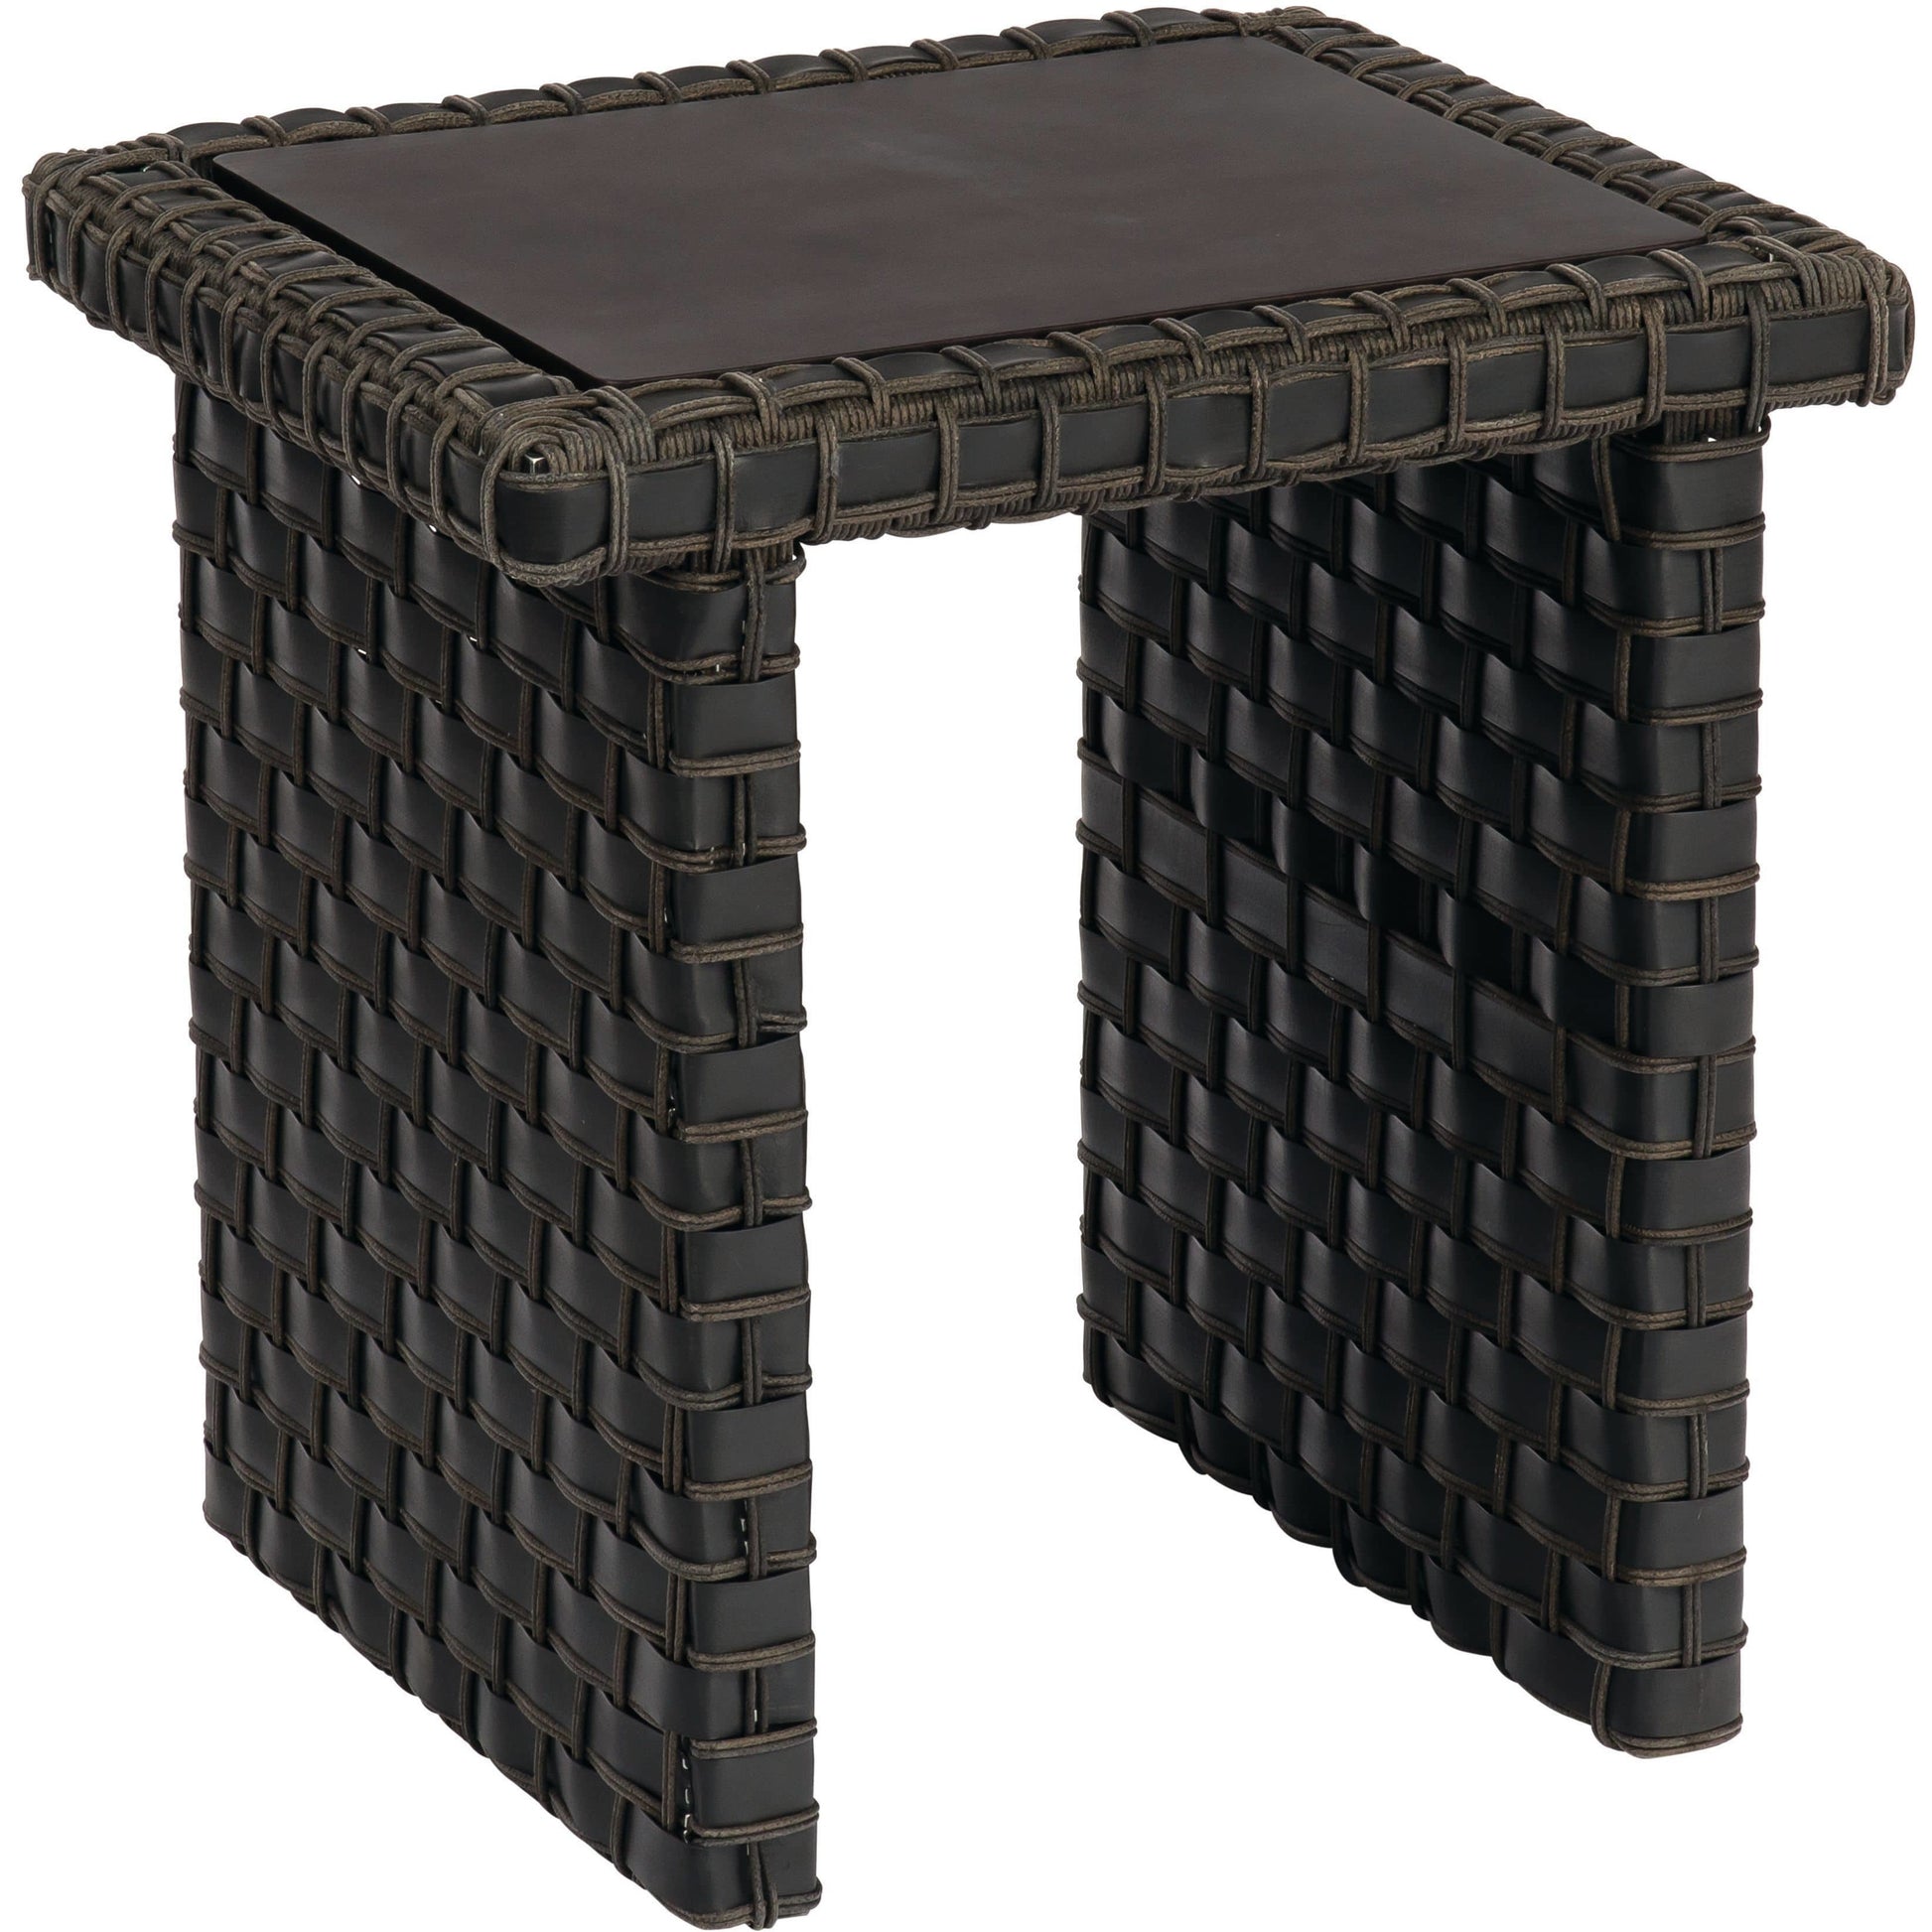 End Table S640201 Woodard Outdoor Patio | Cooper Collection Seating Woodard 